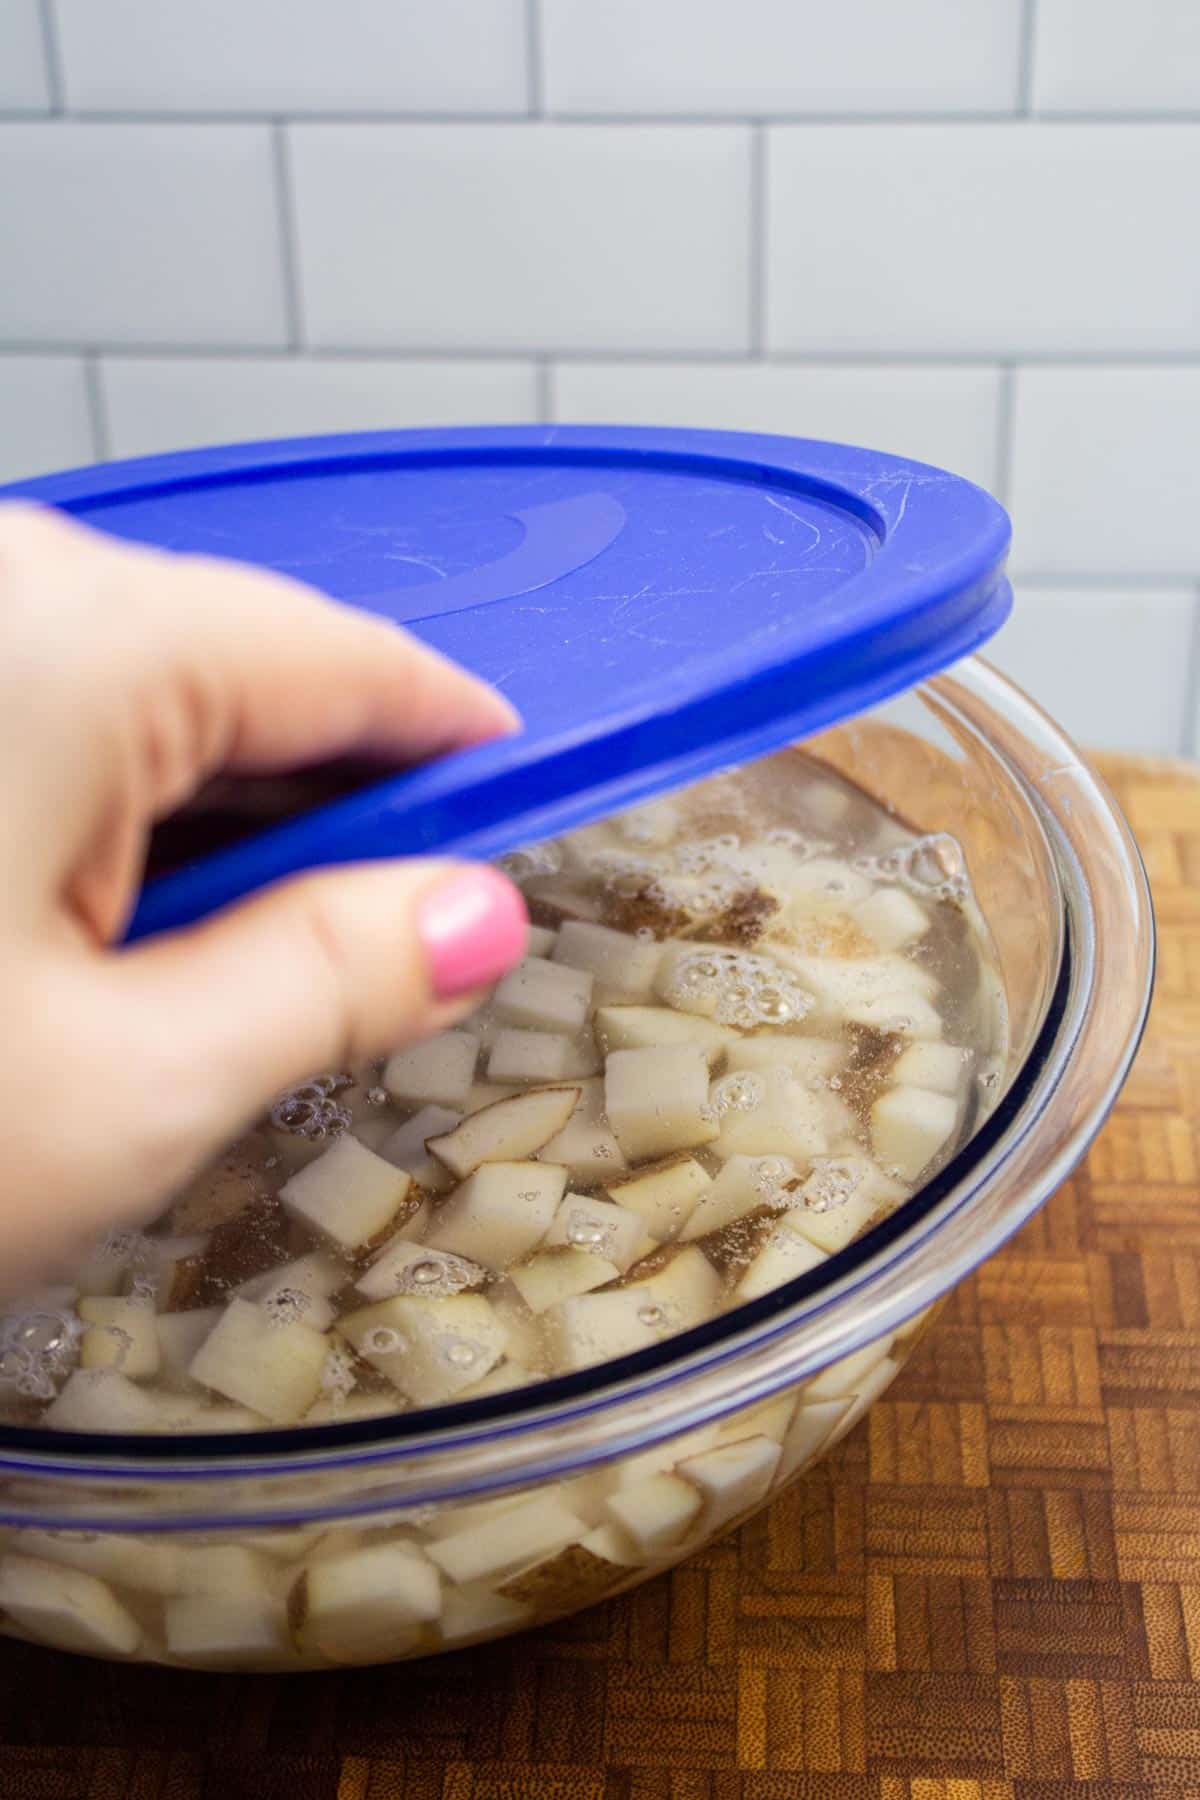 Putting a lid on a bowl of diced potatoes in water.